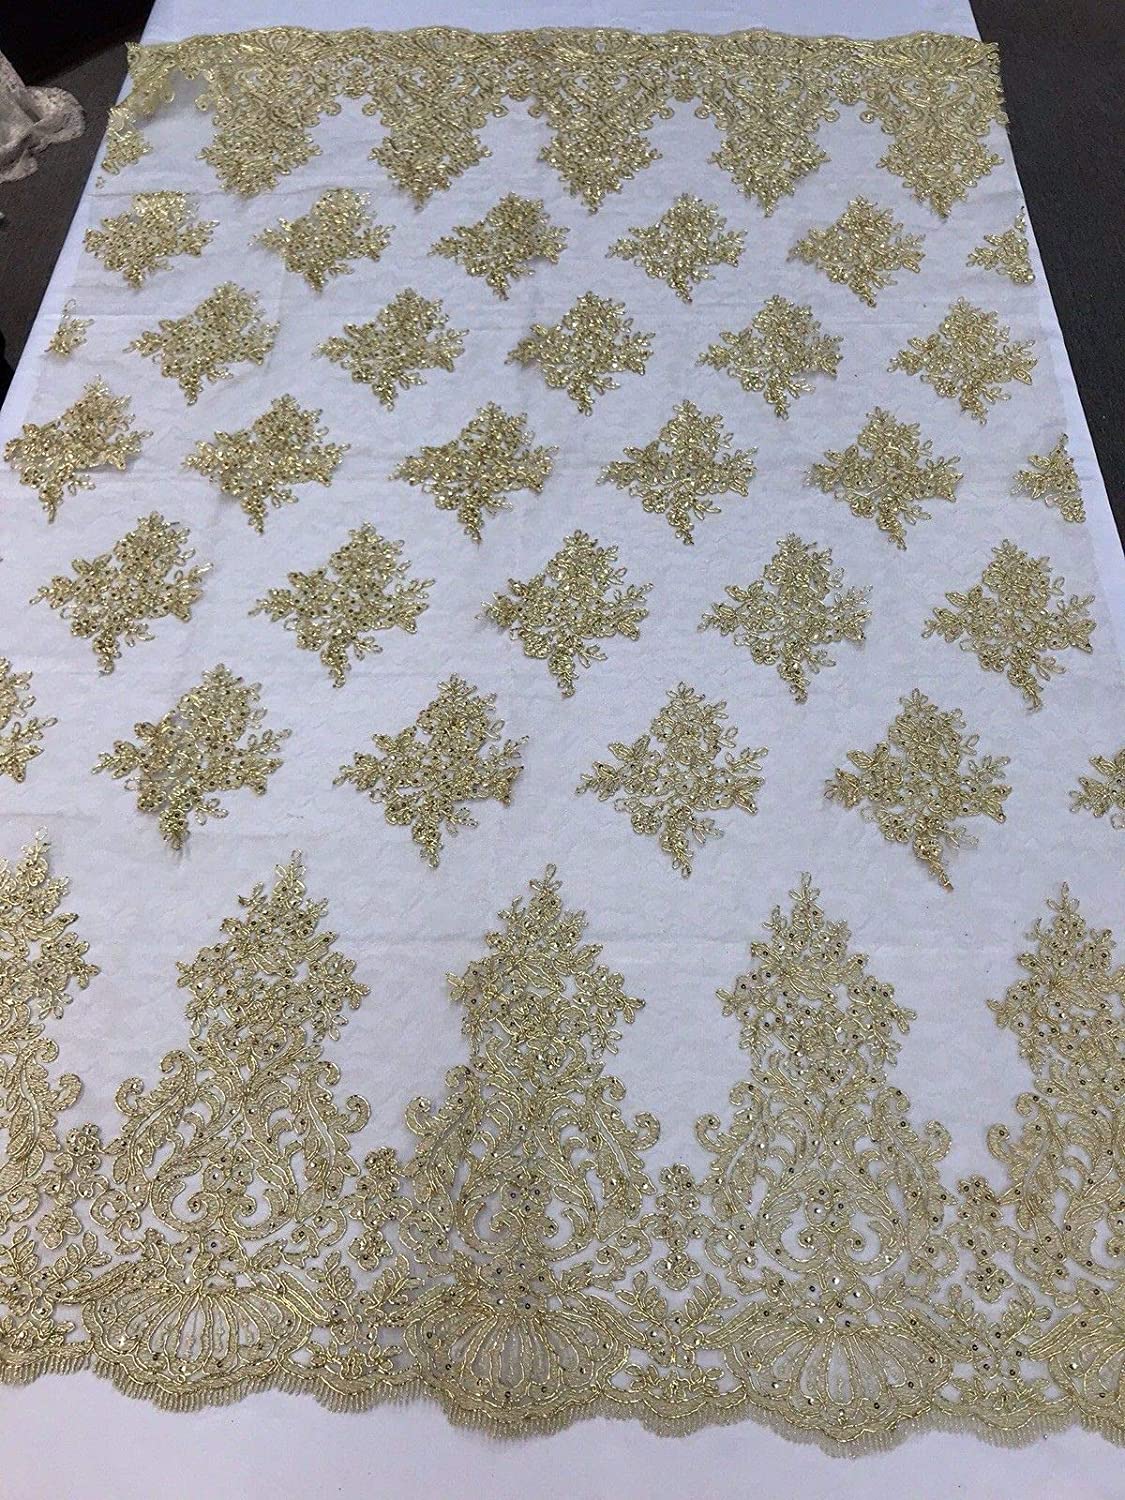 DK-GOLD METALLIC DAMASK LACE EMBROIDERY ON A TEXTURE MESH-BY YARD.